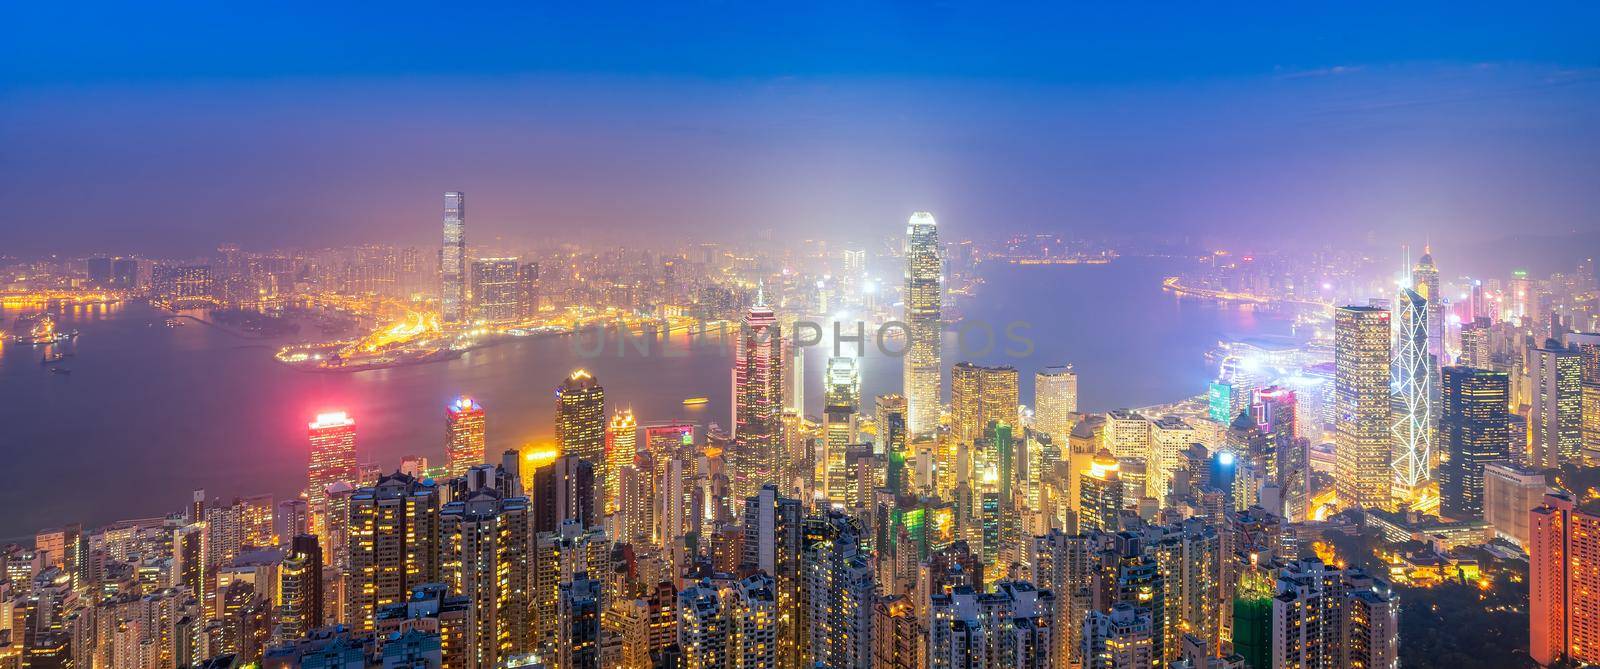 Panorama view over Hong kong downtown the famous cityscape view of Hong Kong skyline during twilight time view from the Victoria peak in Hong Kong. by Nuamfolio